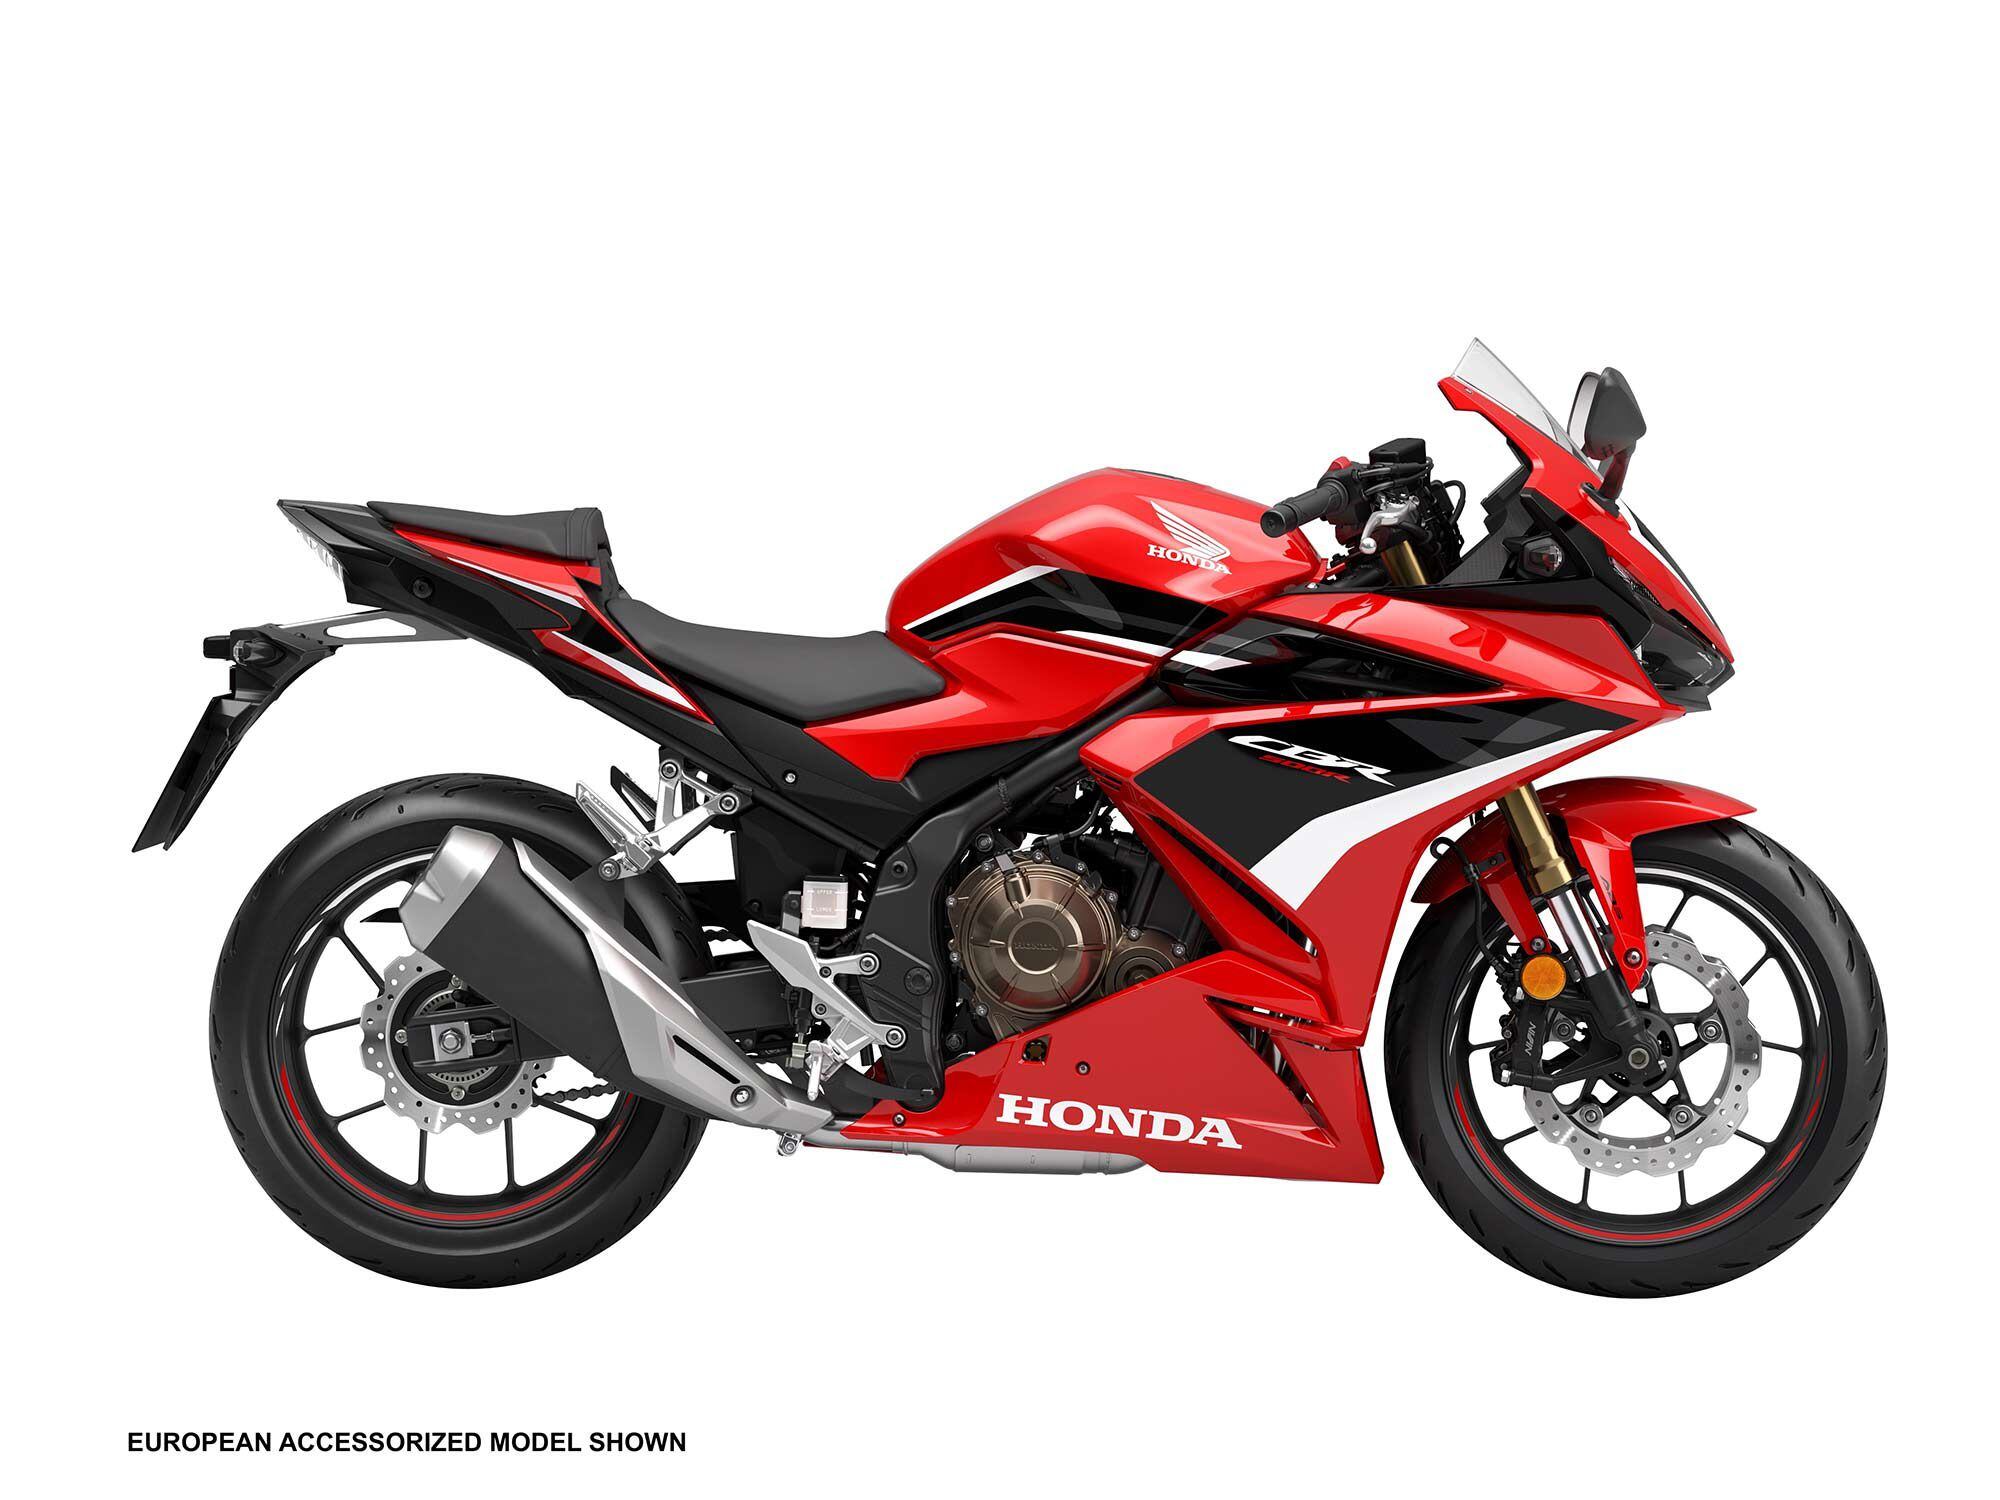 The CBR500R is one of three entry-level 500cc Honda models for new and returning riders, or those looking for a sporty yet practical bike for around-town riding.